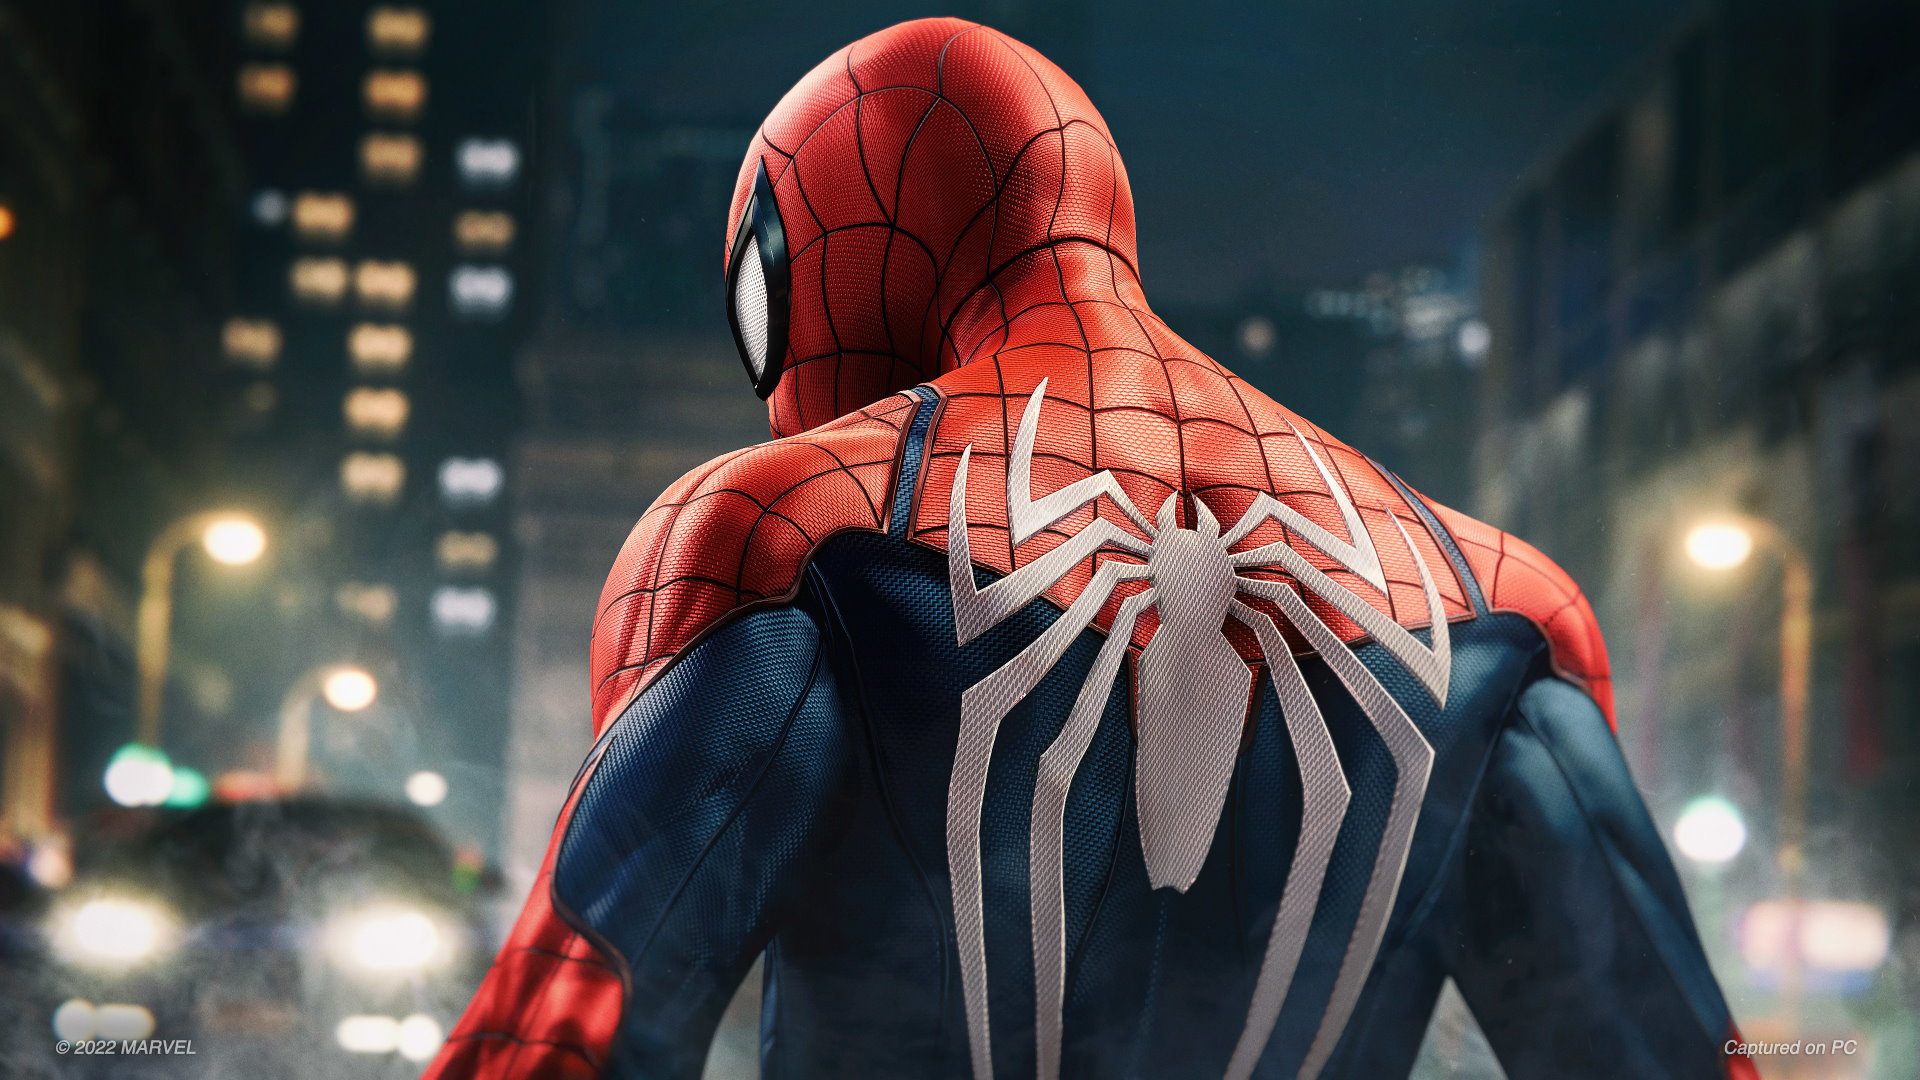 Spider-Man Remastered PC specs, features detailed